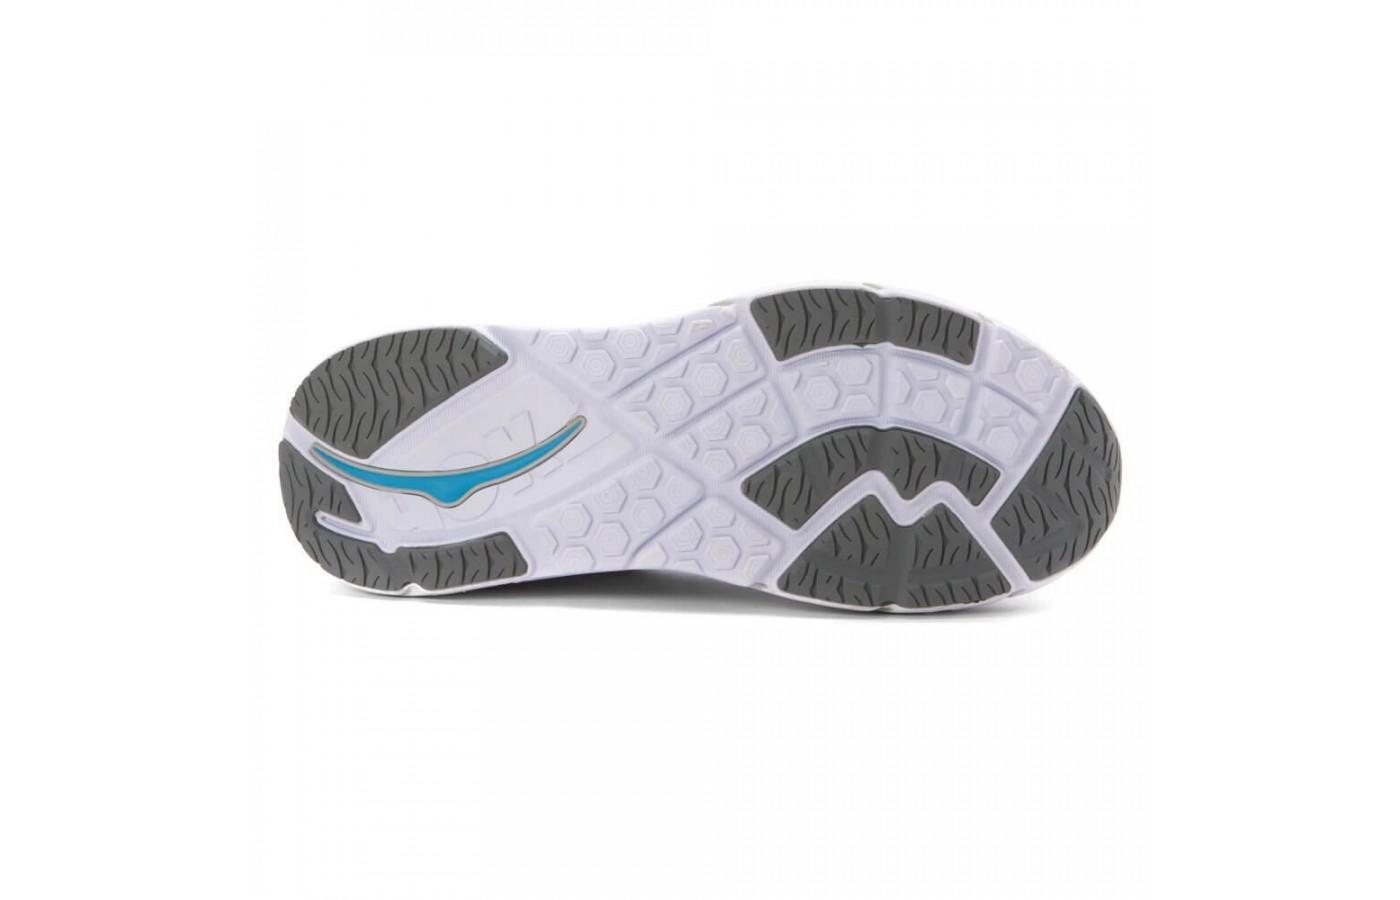 The outsole of the Hoka One One Valor designed to provide continual ground contact 